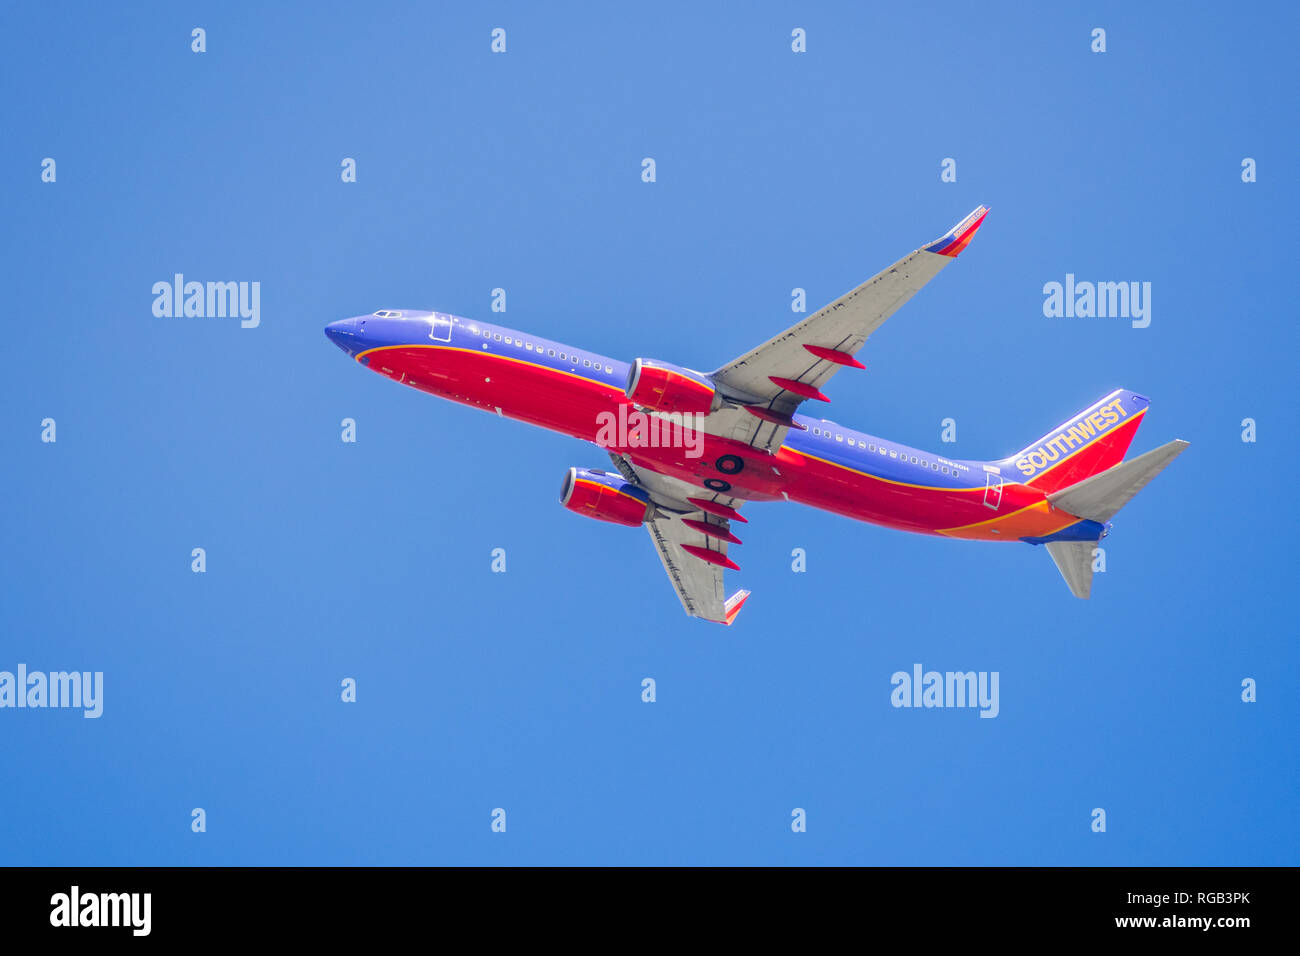 May 3, 2018 Santa Clara / CA / USA - Southwest Airlines aircraft up in the air after taking off from Norman Y. Mineta San Jose International Airport,  Stock Photo